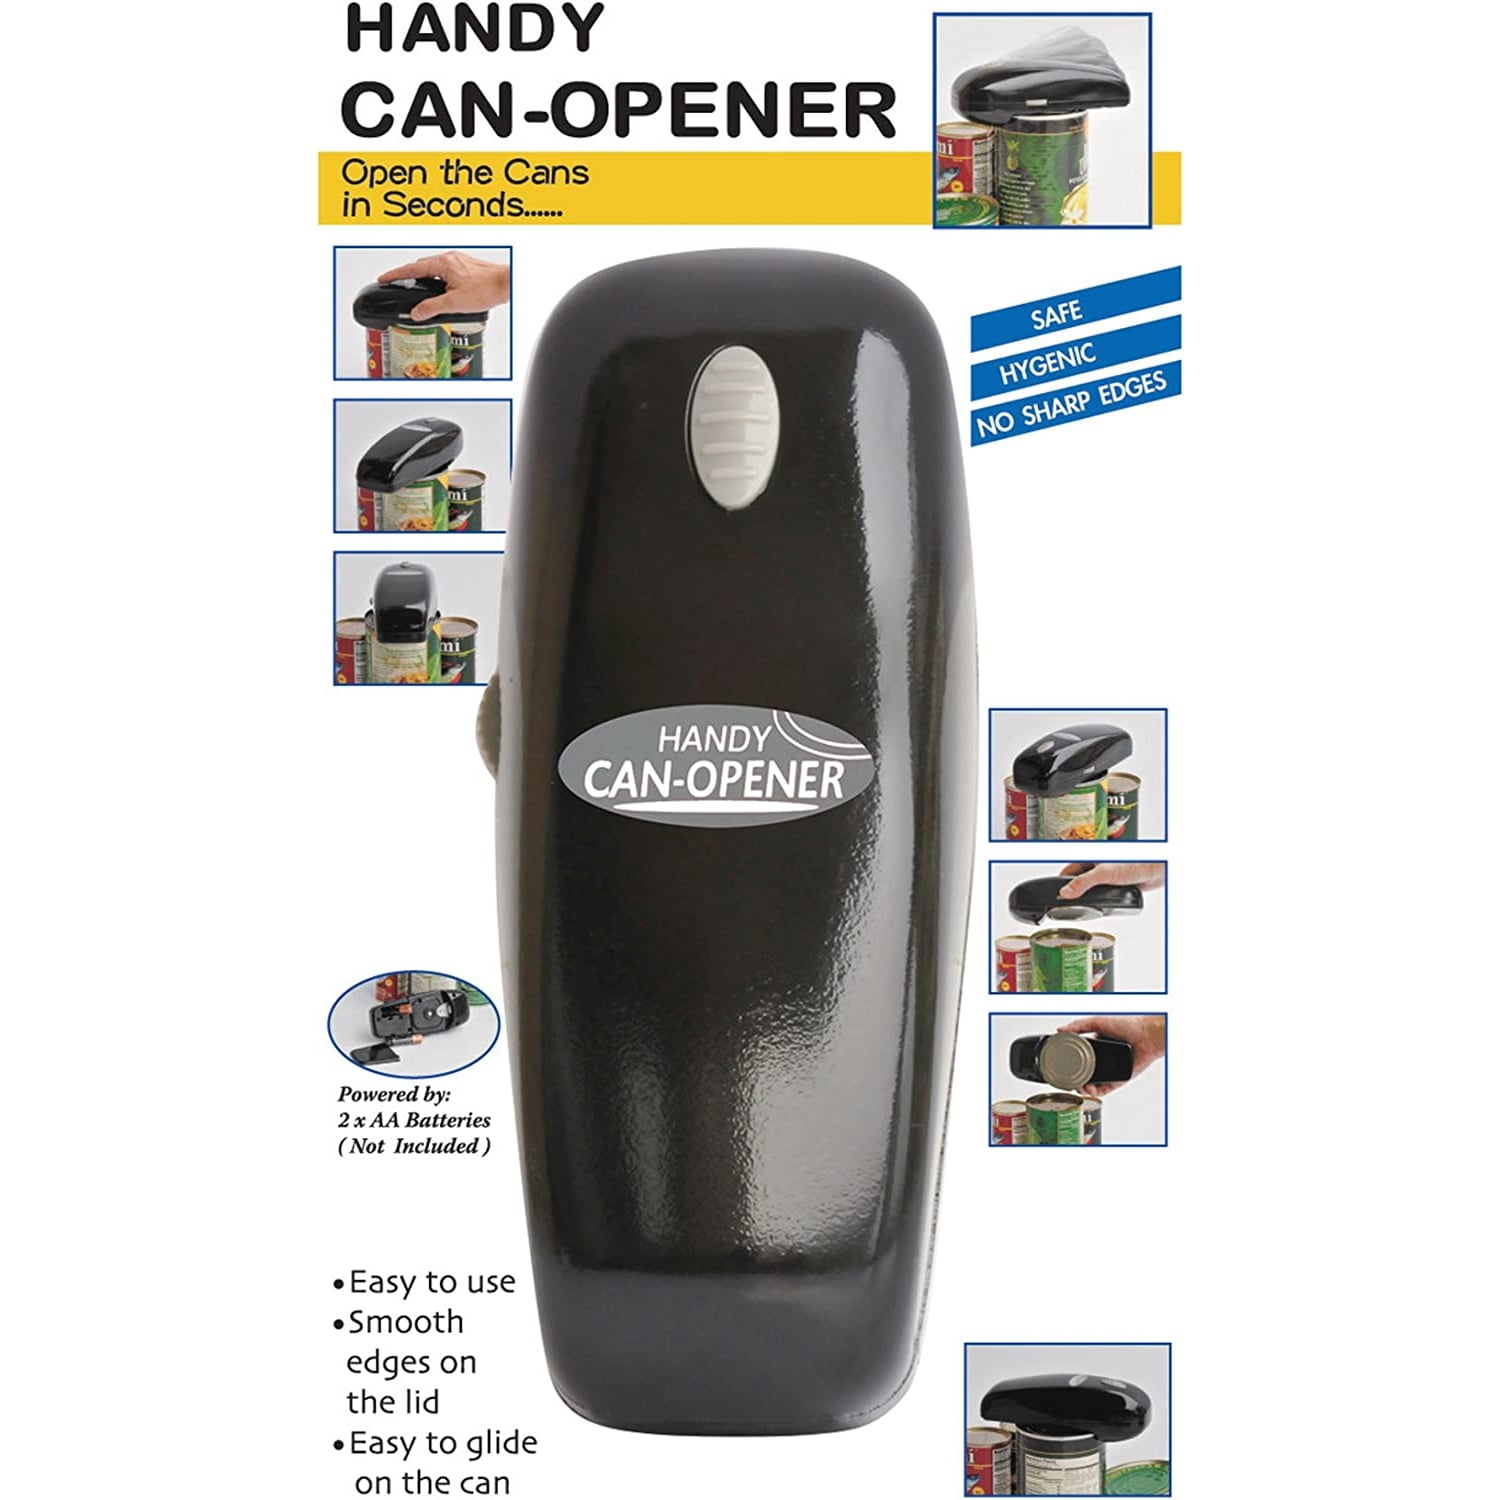 Kratax Electric Can Opener, One Touch Switch No Sharp Edge fit Any